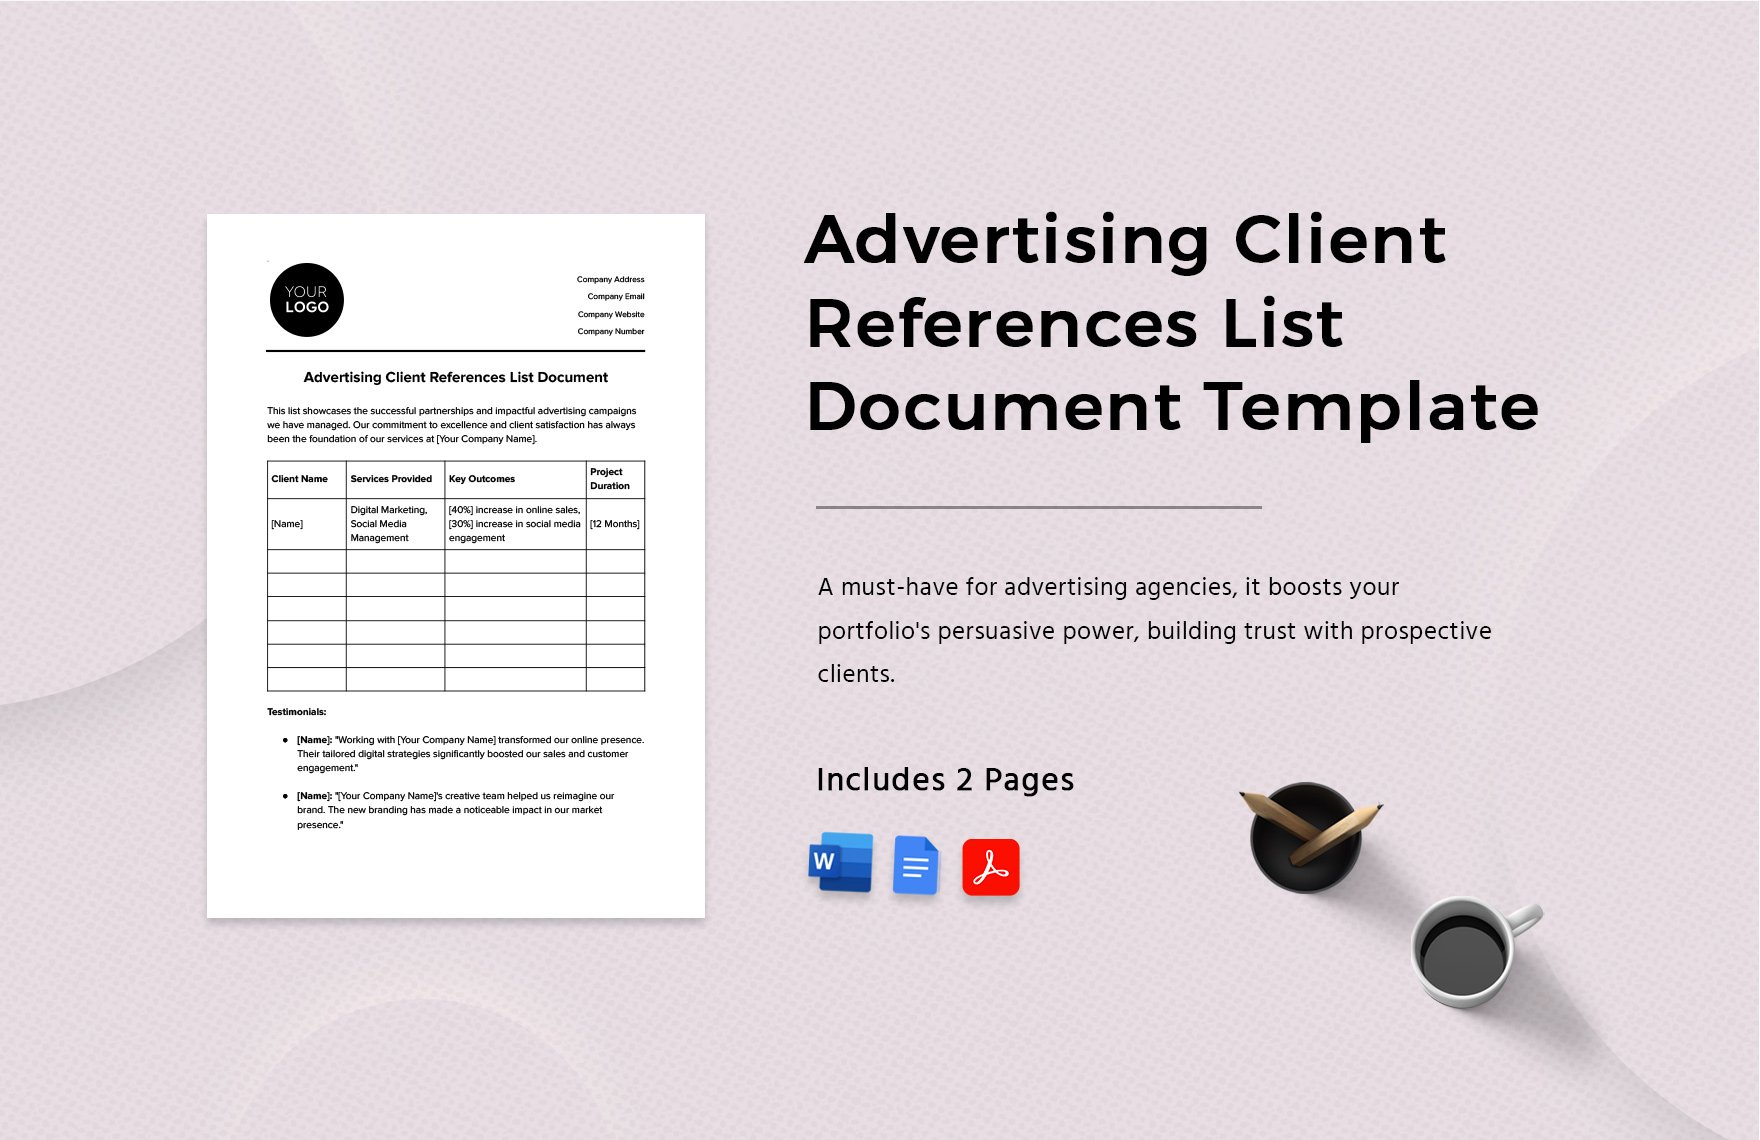 Advertising Client References List Document Template